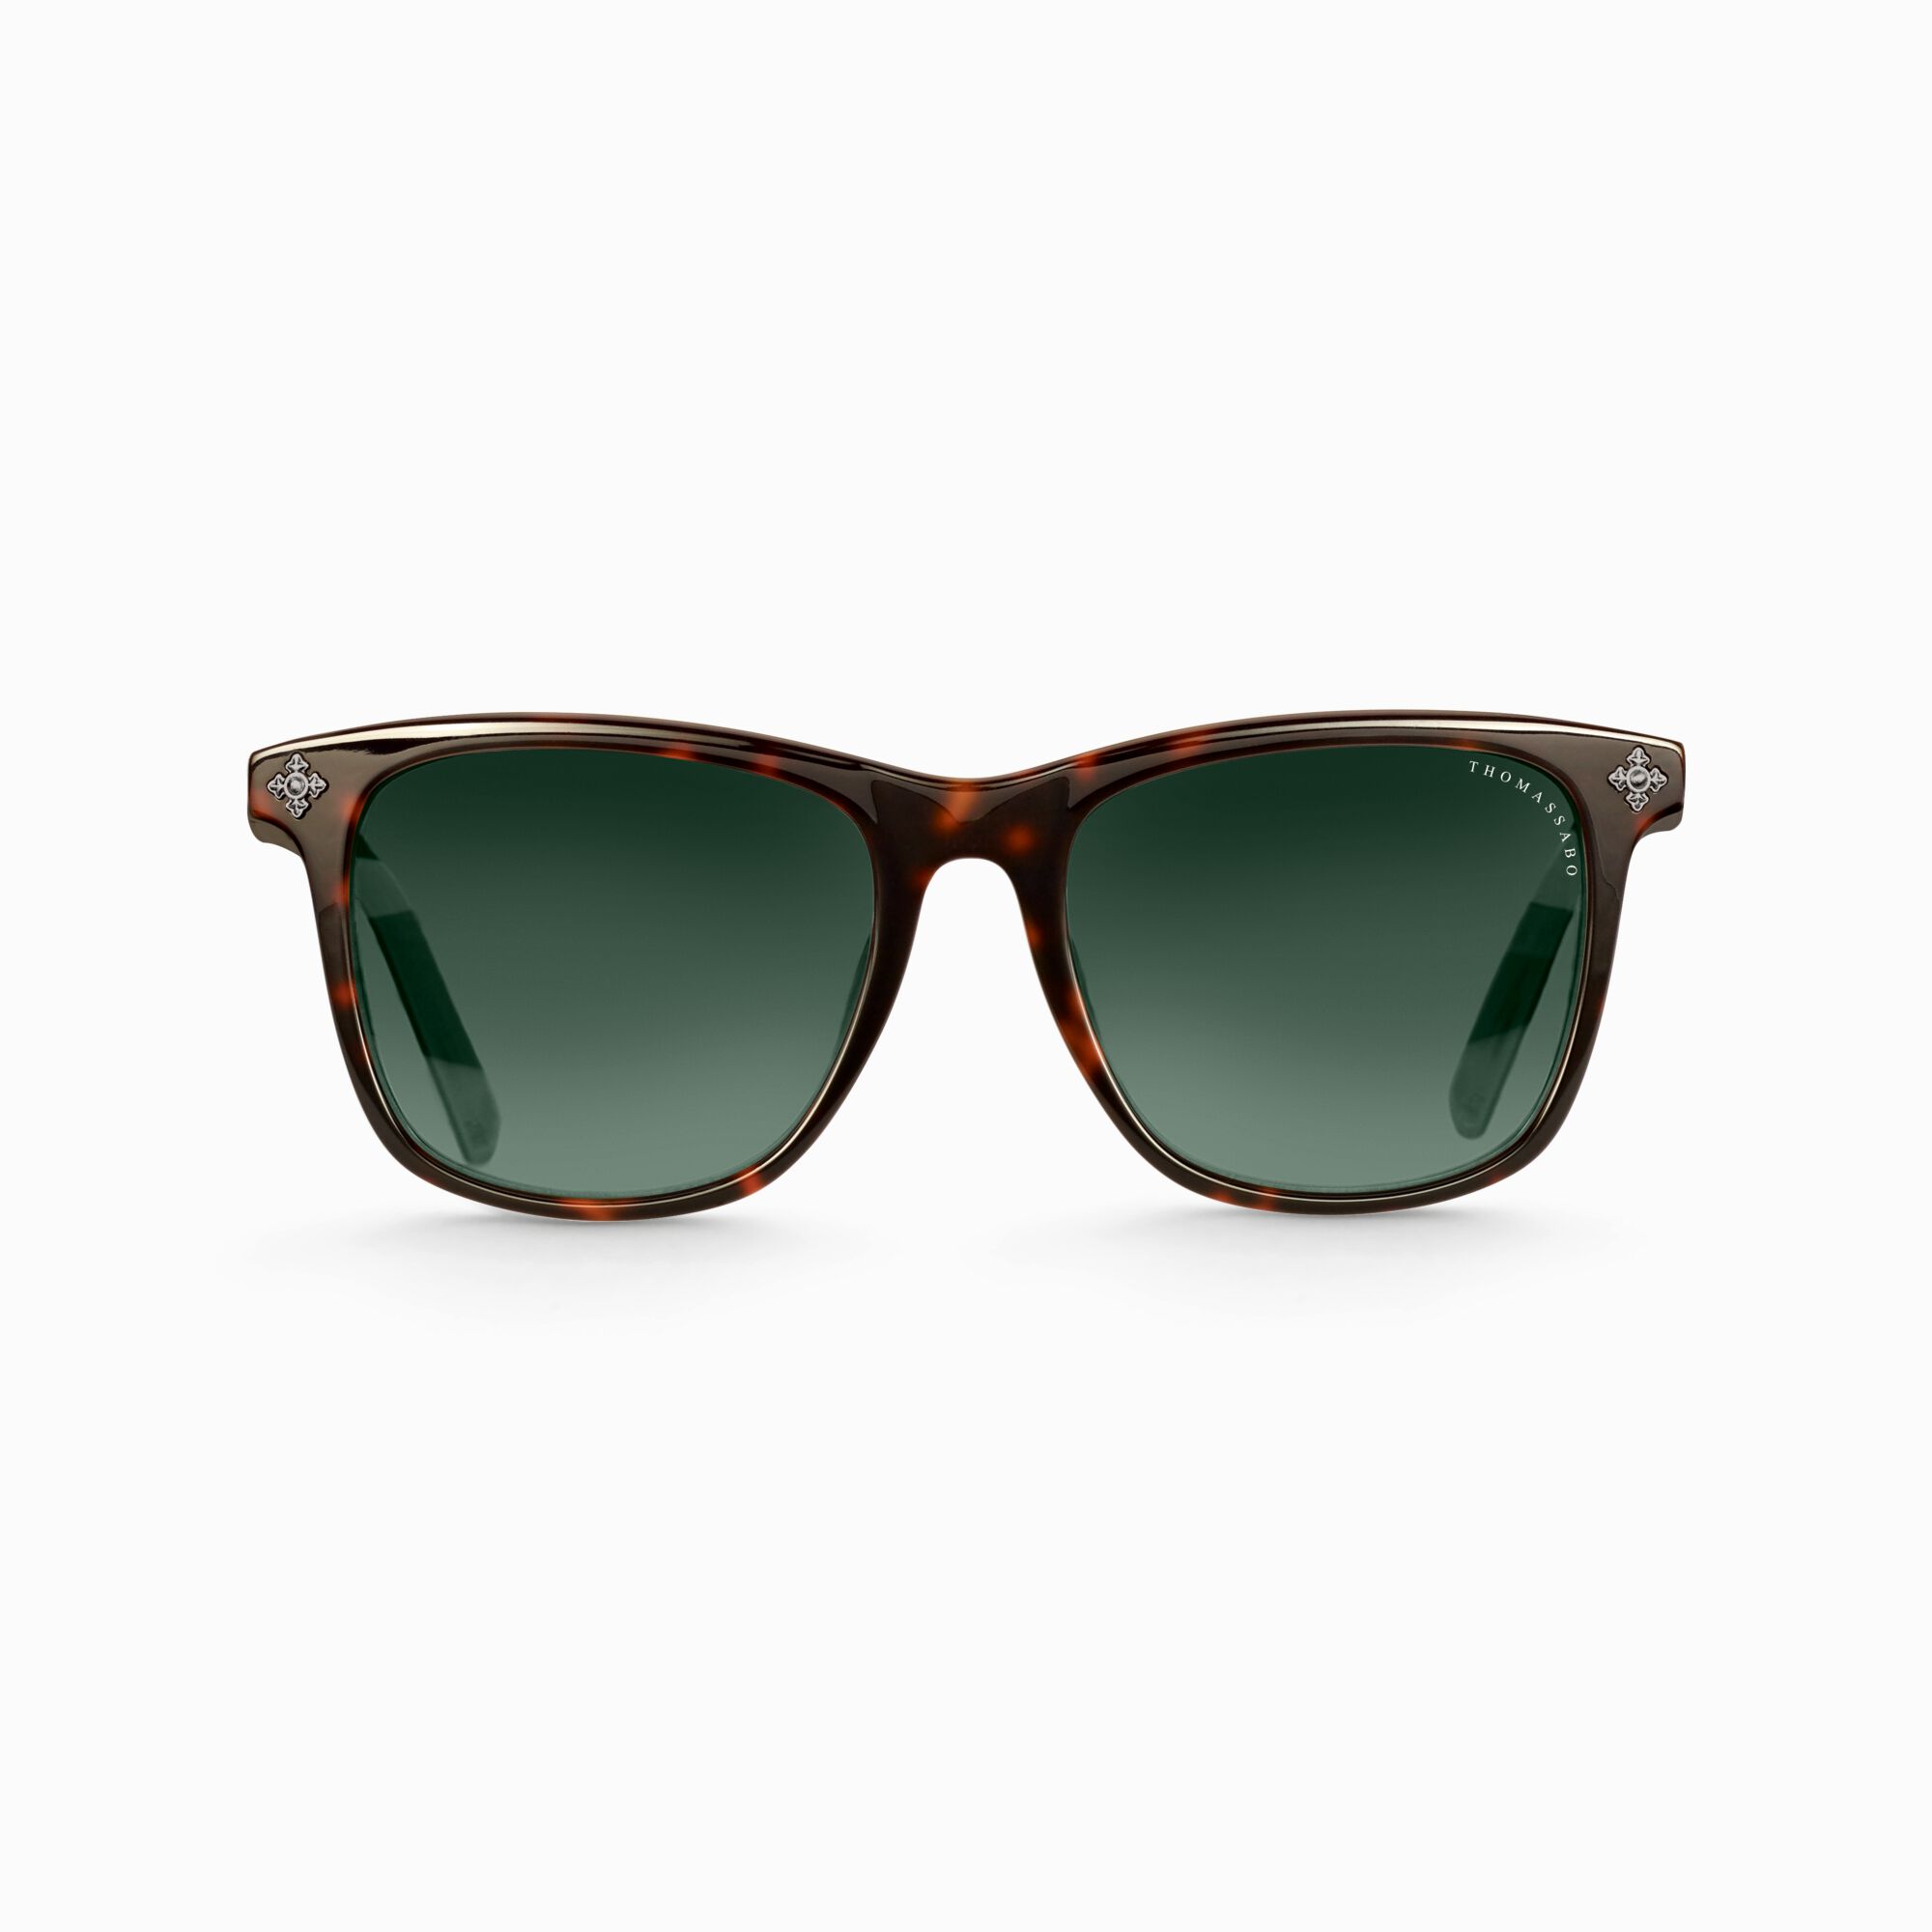 Sunglasses Marlon square cross Havana from the  collection in the THOMAS SABO online store